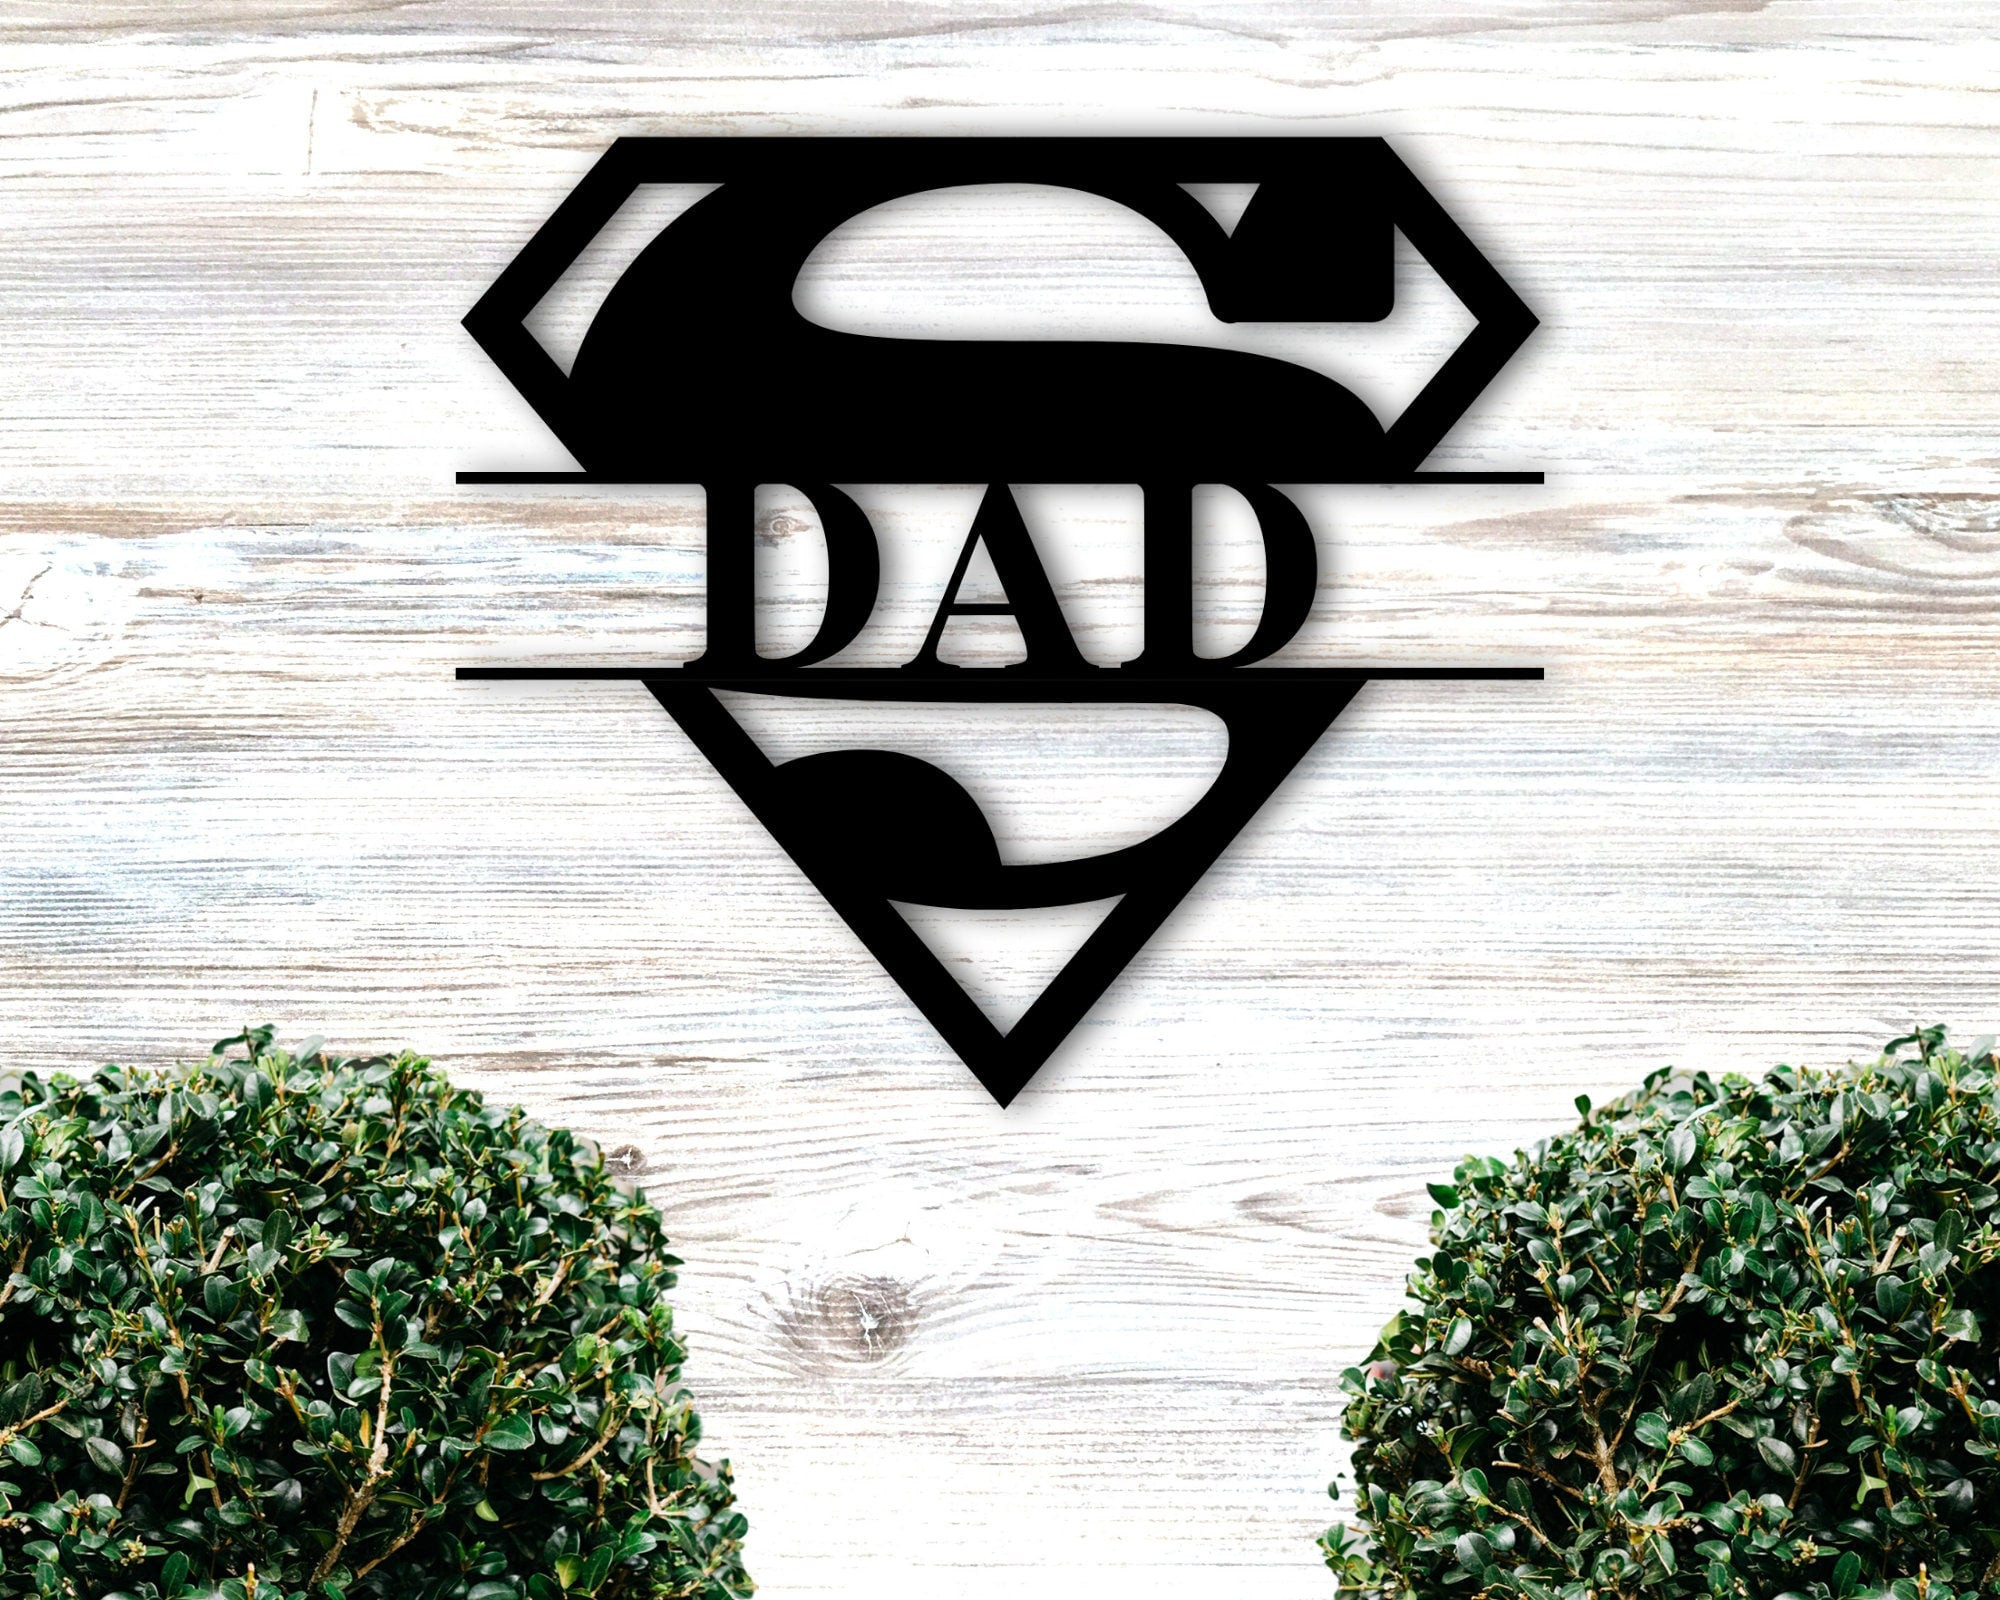 Father's Day Gift For Dad, First Father's Day Gift, Custom Metal Name Sign, Gift From Wife, Daughter, Son, Personalized Metal Art For Dad, Metal Laser Cut Metal Signs Custom Gift Ideas 14x14IN